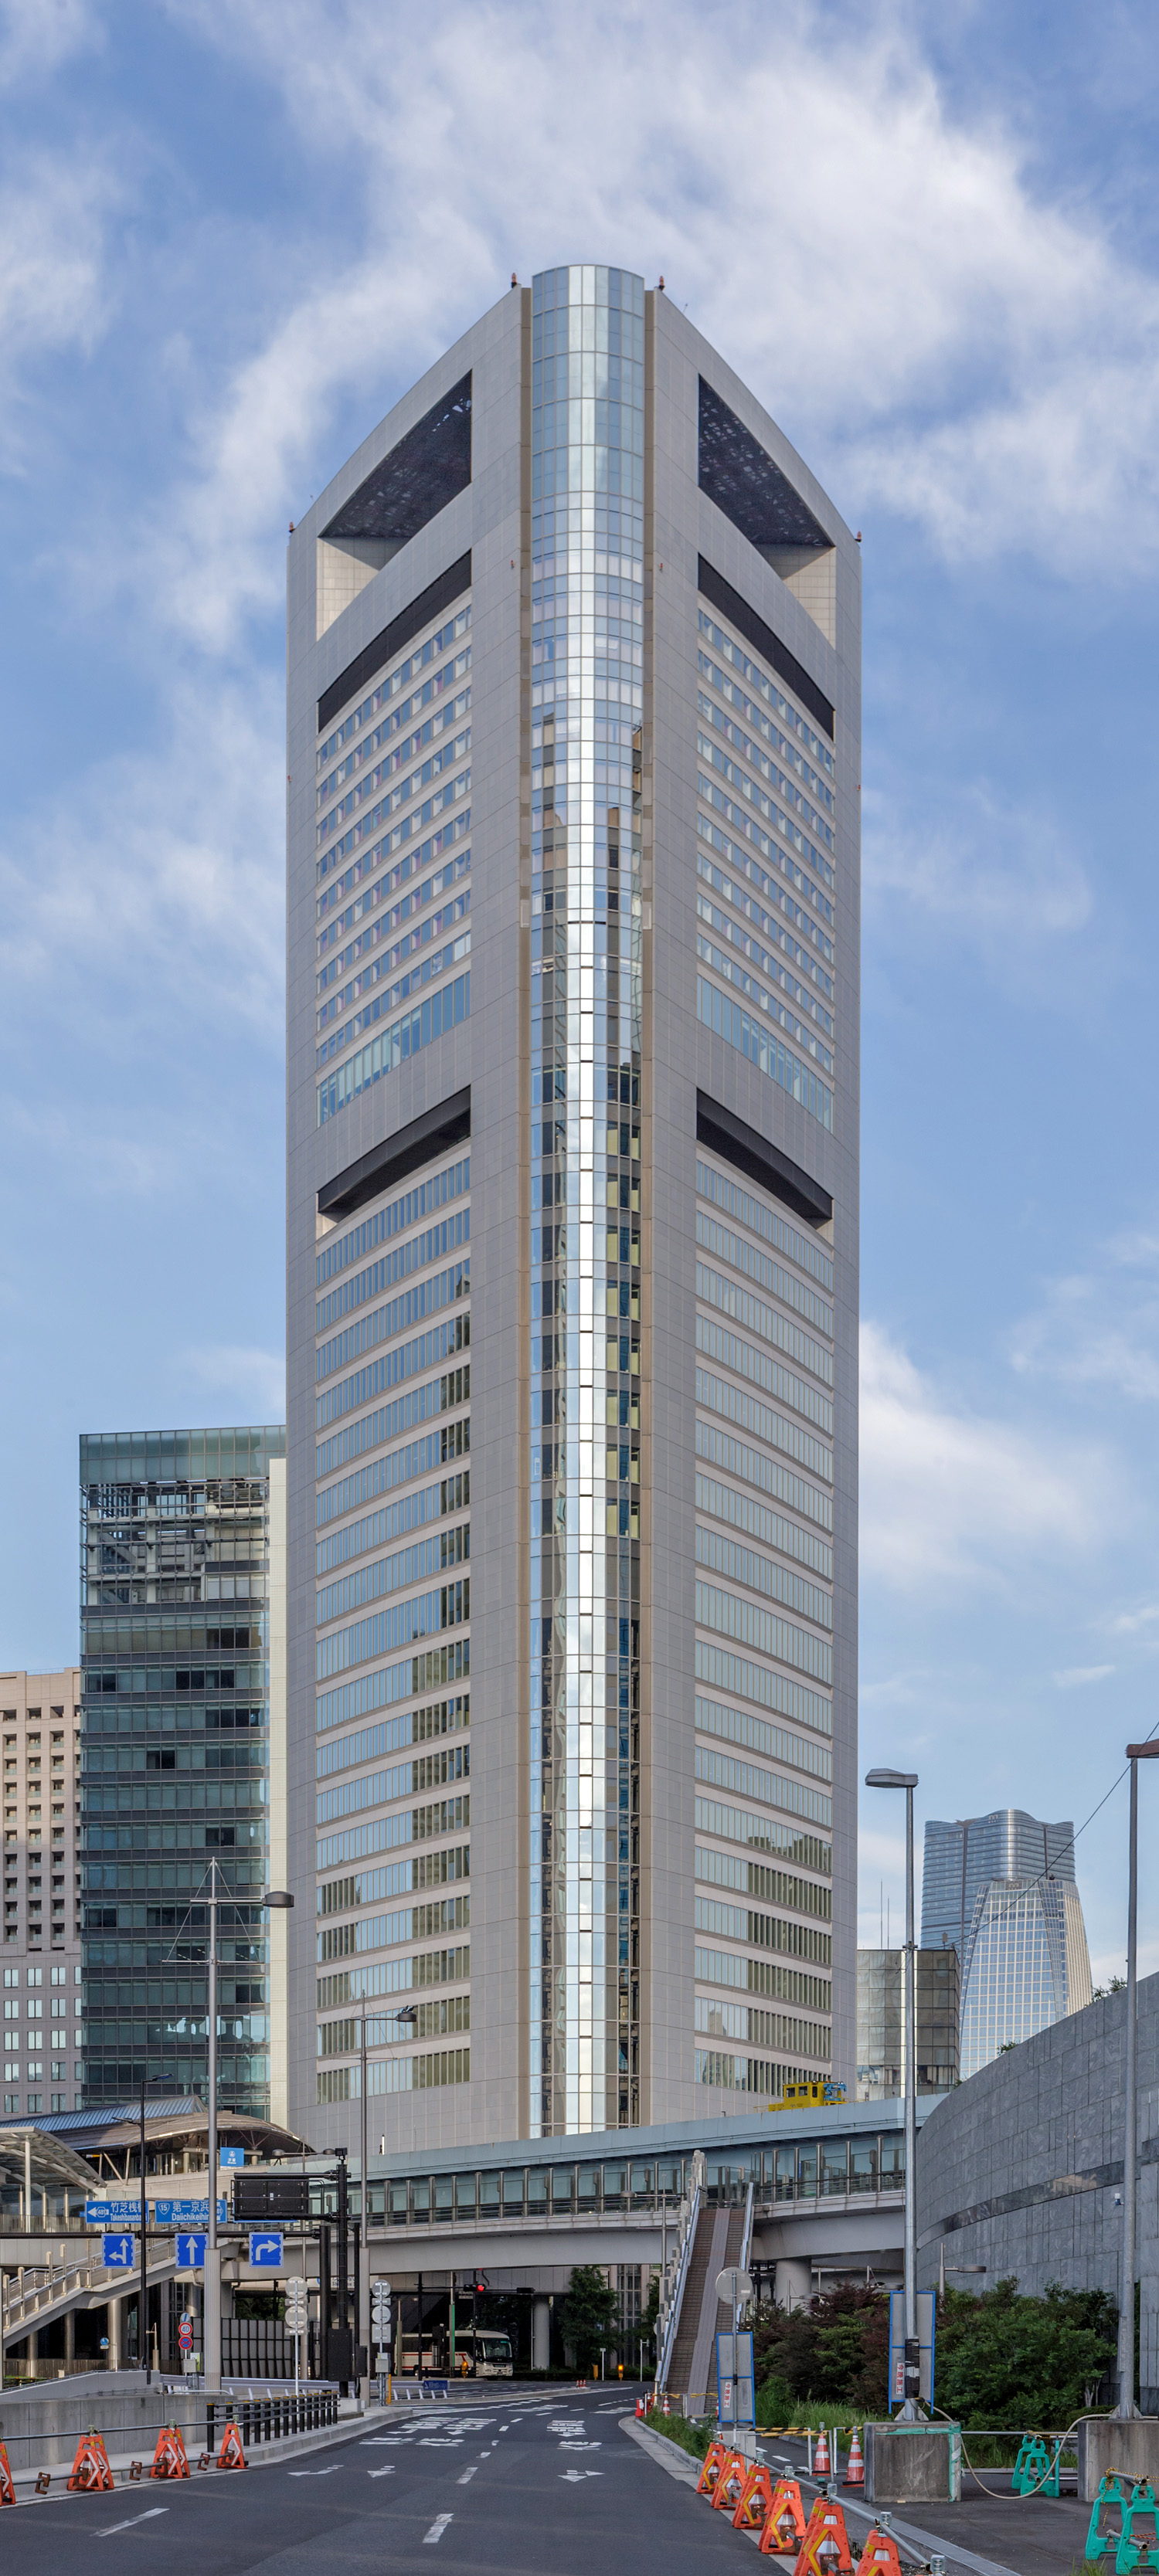 Shiodome Media Tower, Tokyo - View from the east. © Mathias Beinling